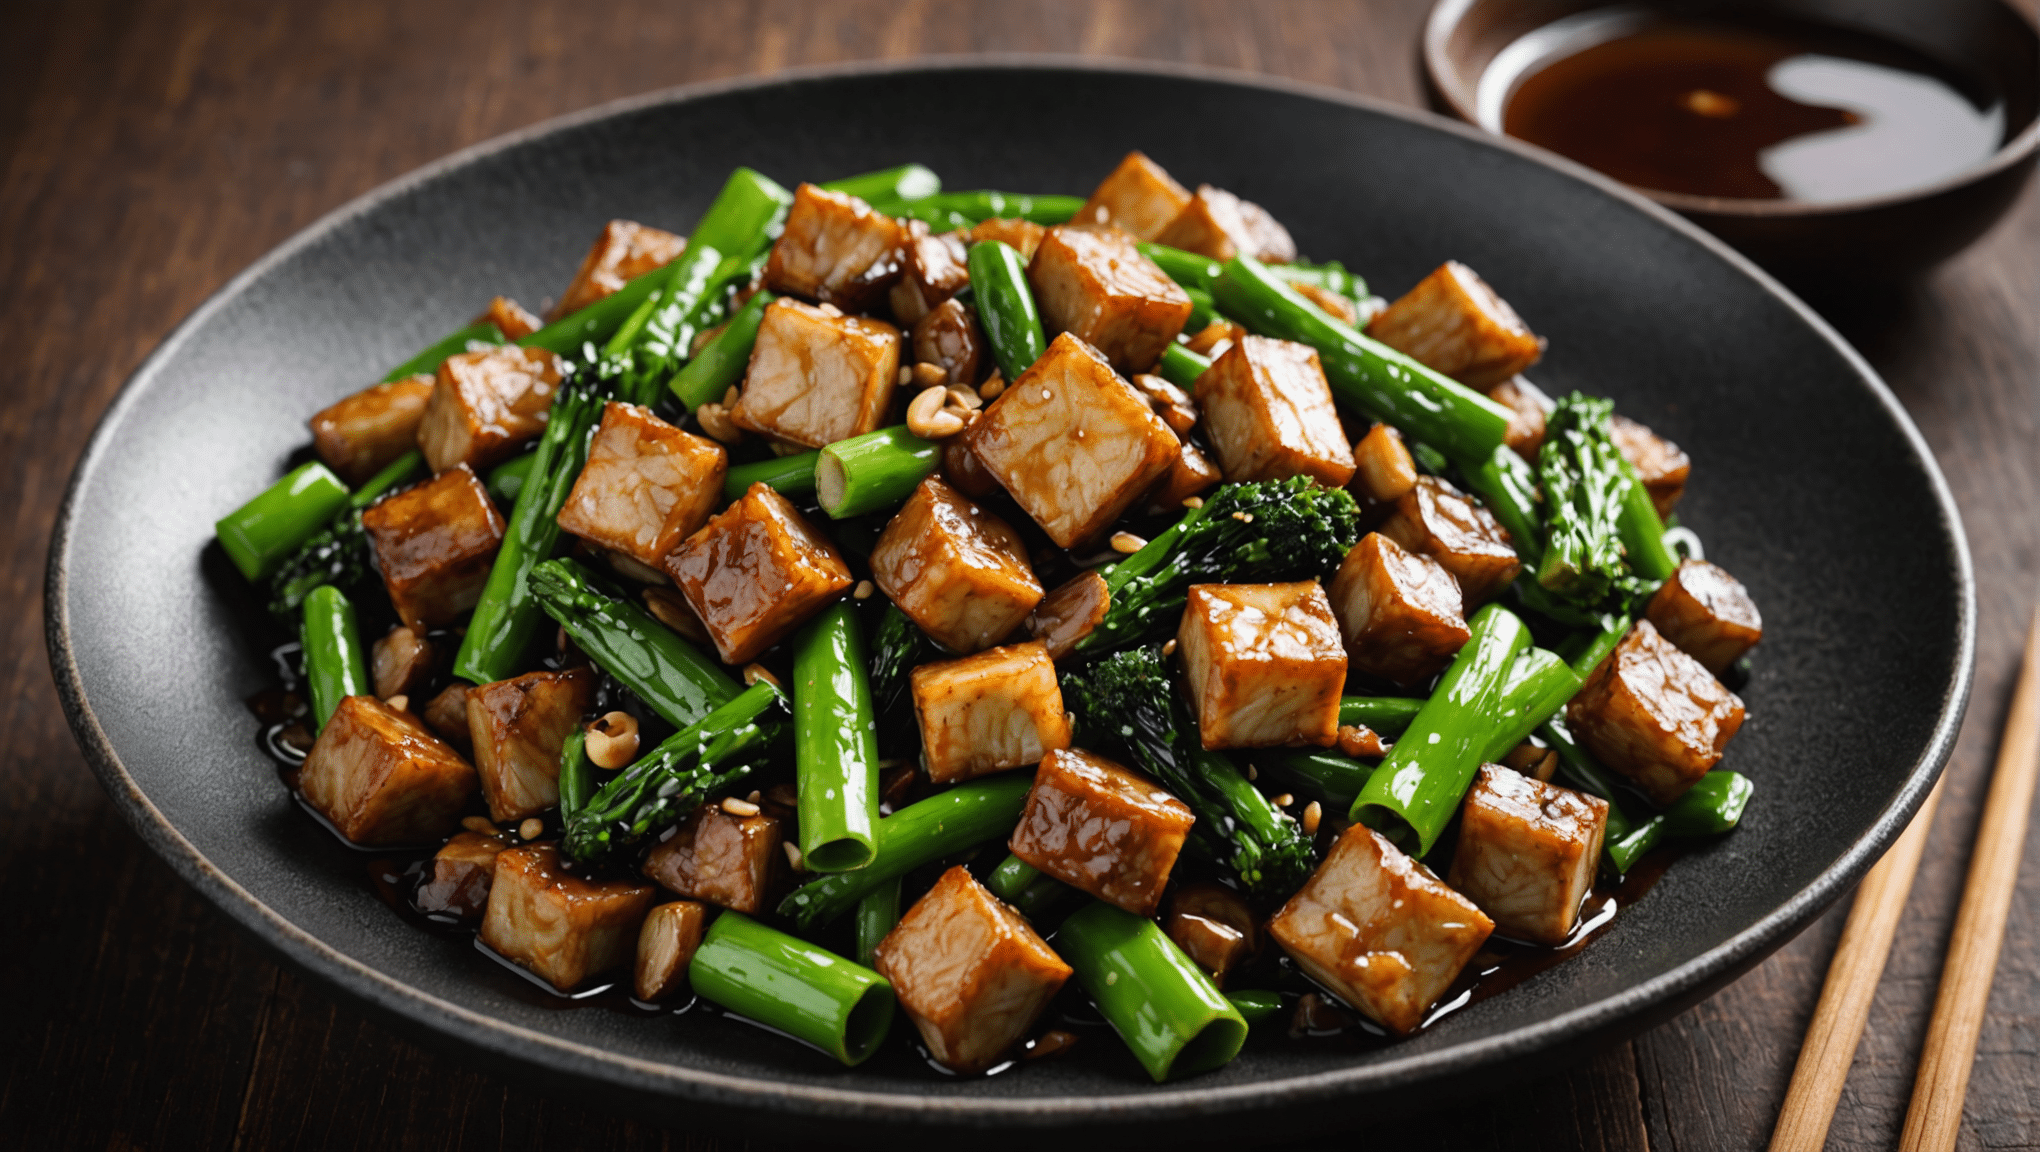 Stir-Fried Chaya with Garlic and Soy Sauce